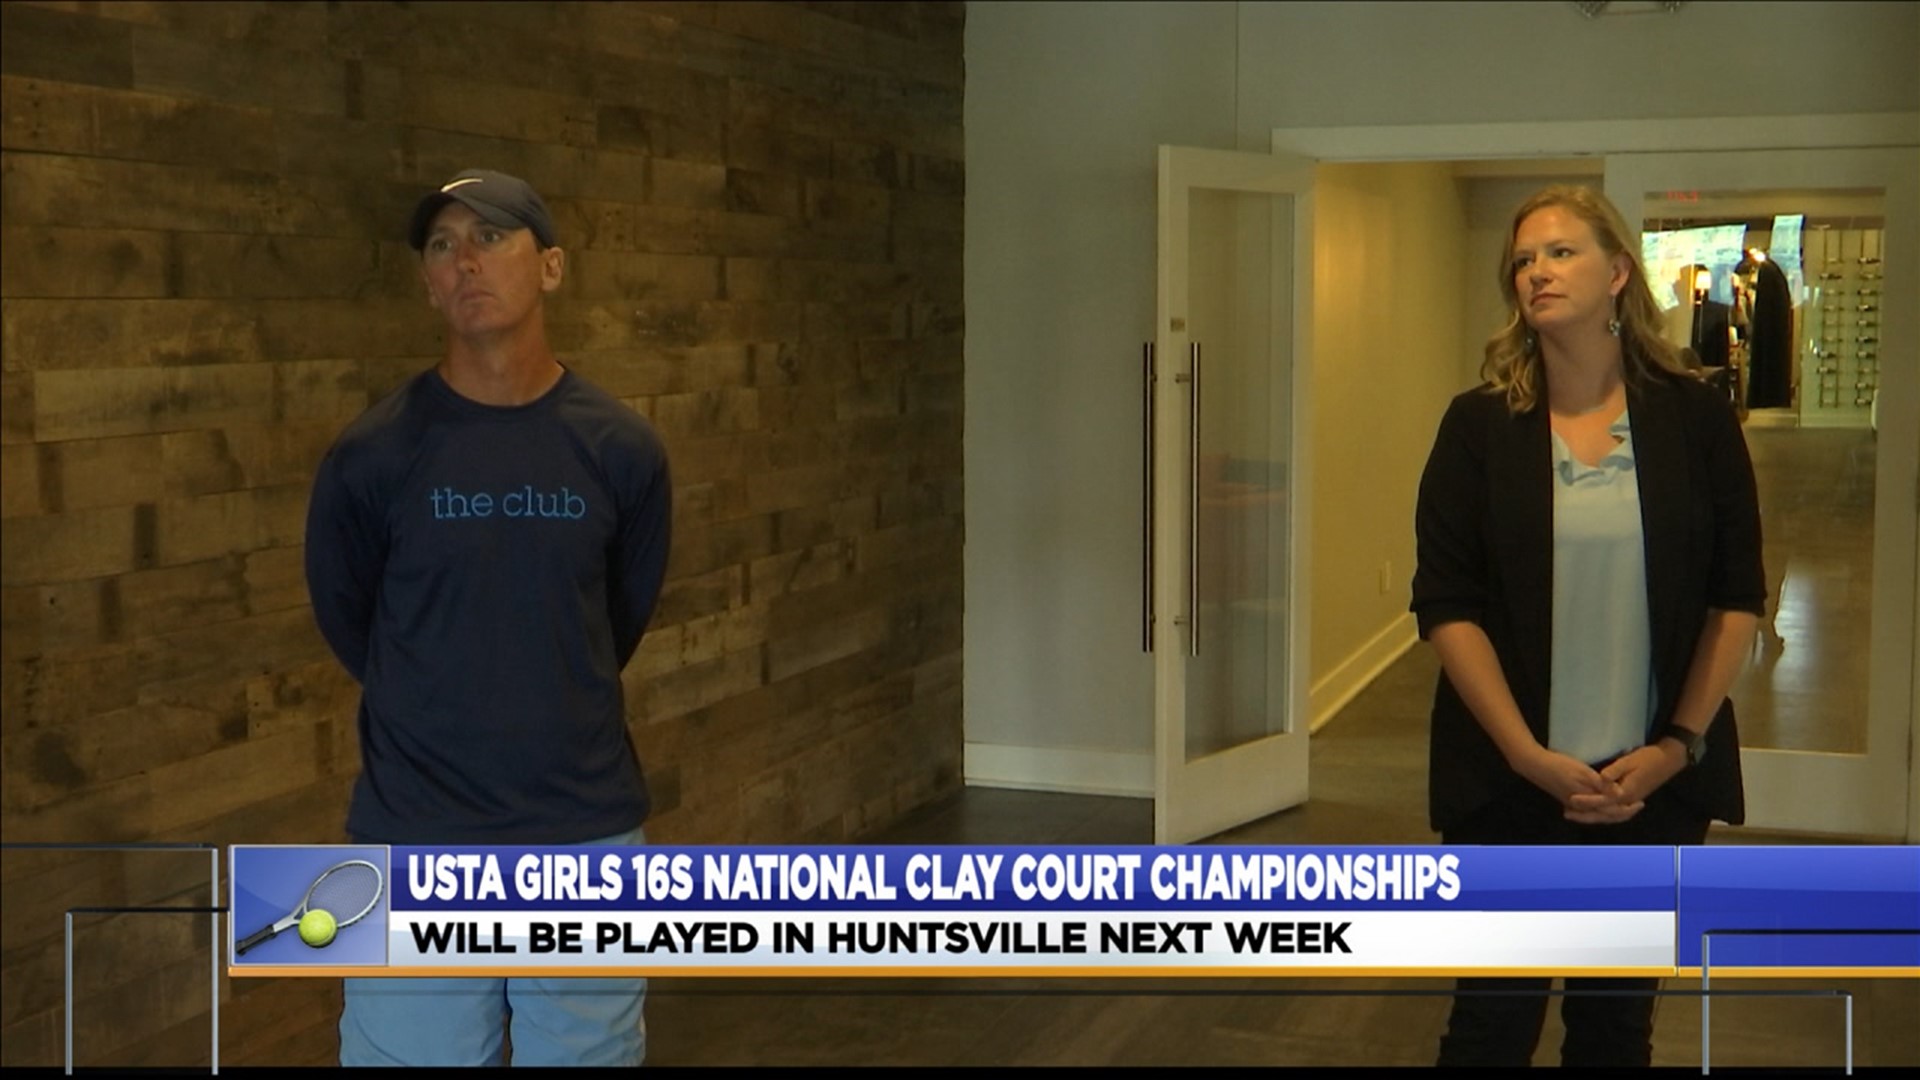 Tennis Champions from ll over the nation are coming to Huntsville next week. The United States Tennis Association have selected Athletic Club Alabama (ACA) to hose the 2019 & 2020 Girls' 16 National Clay Court Championships are coming to Huntsville